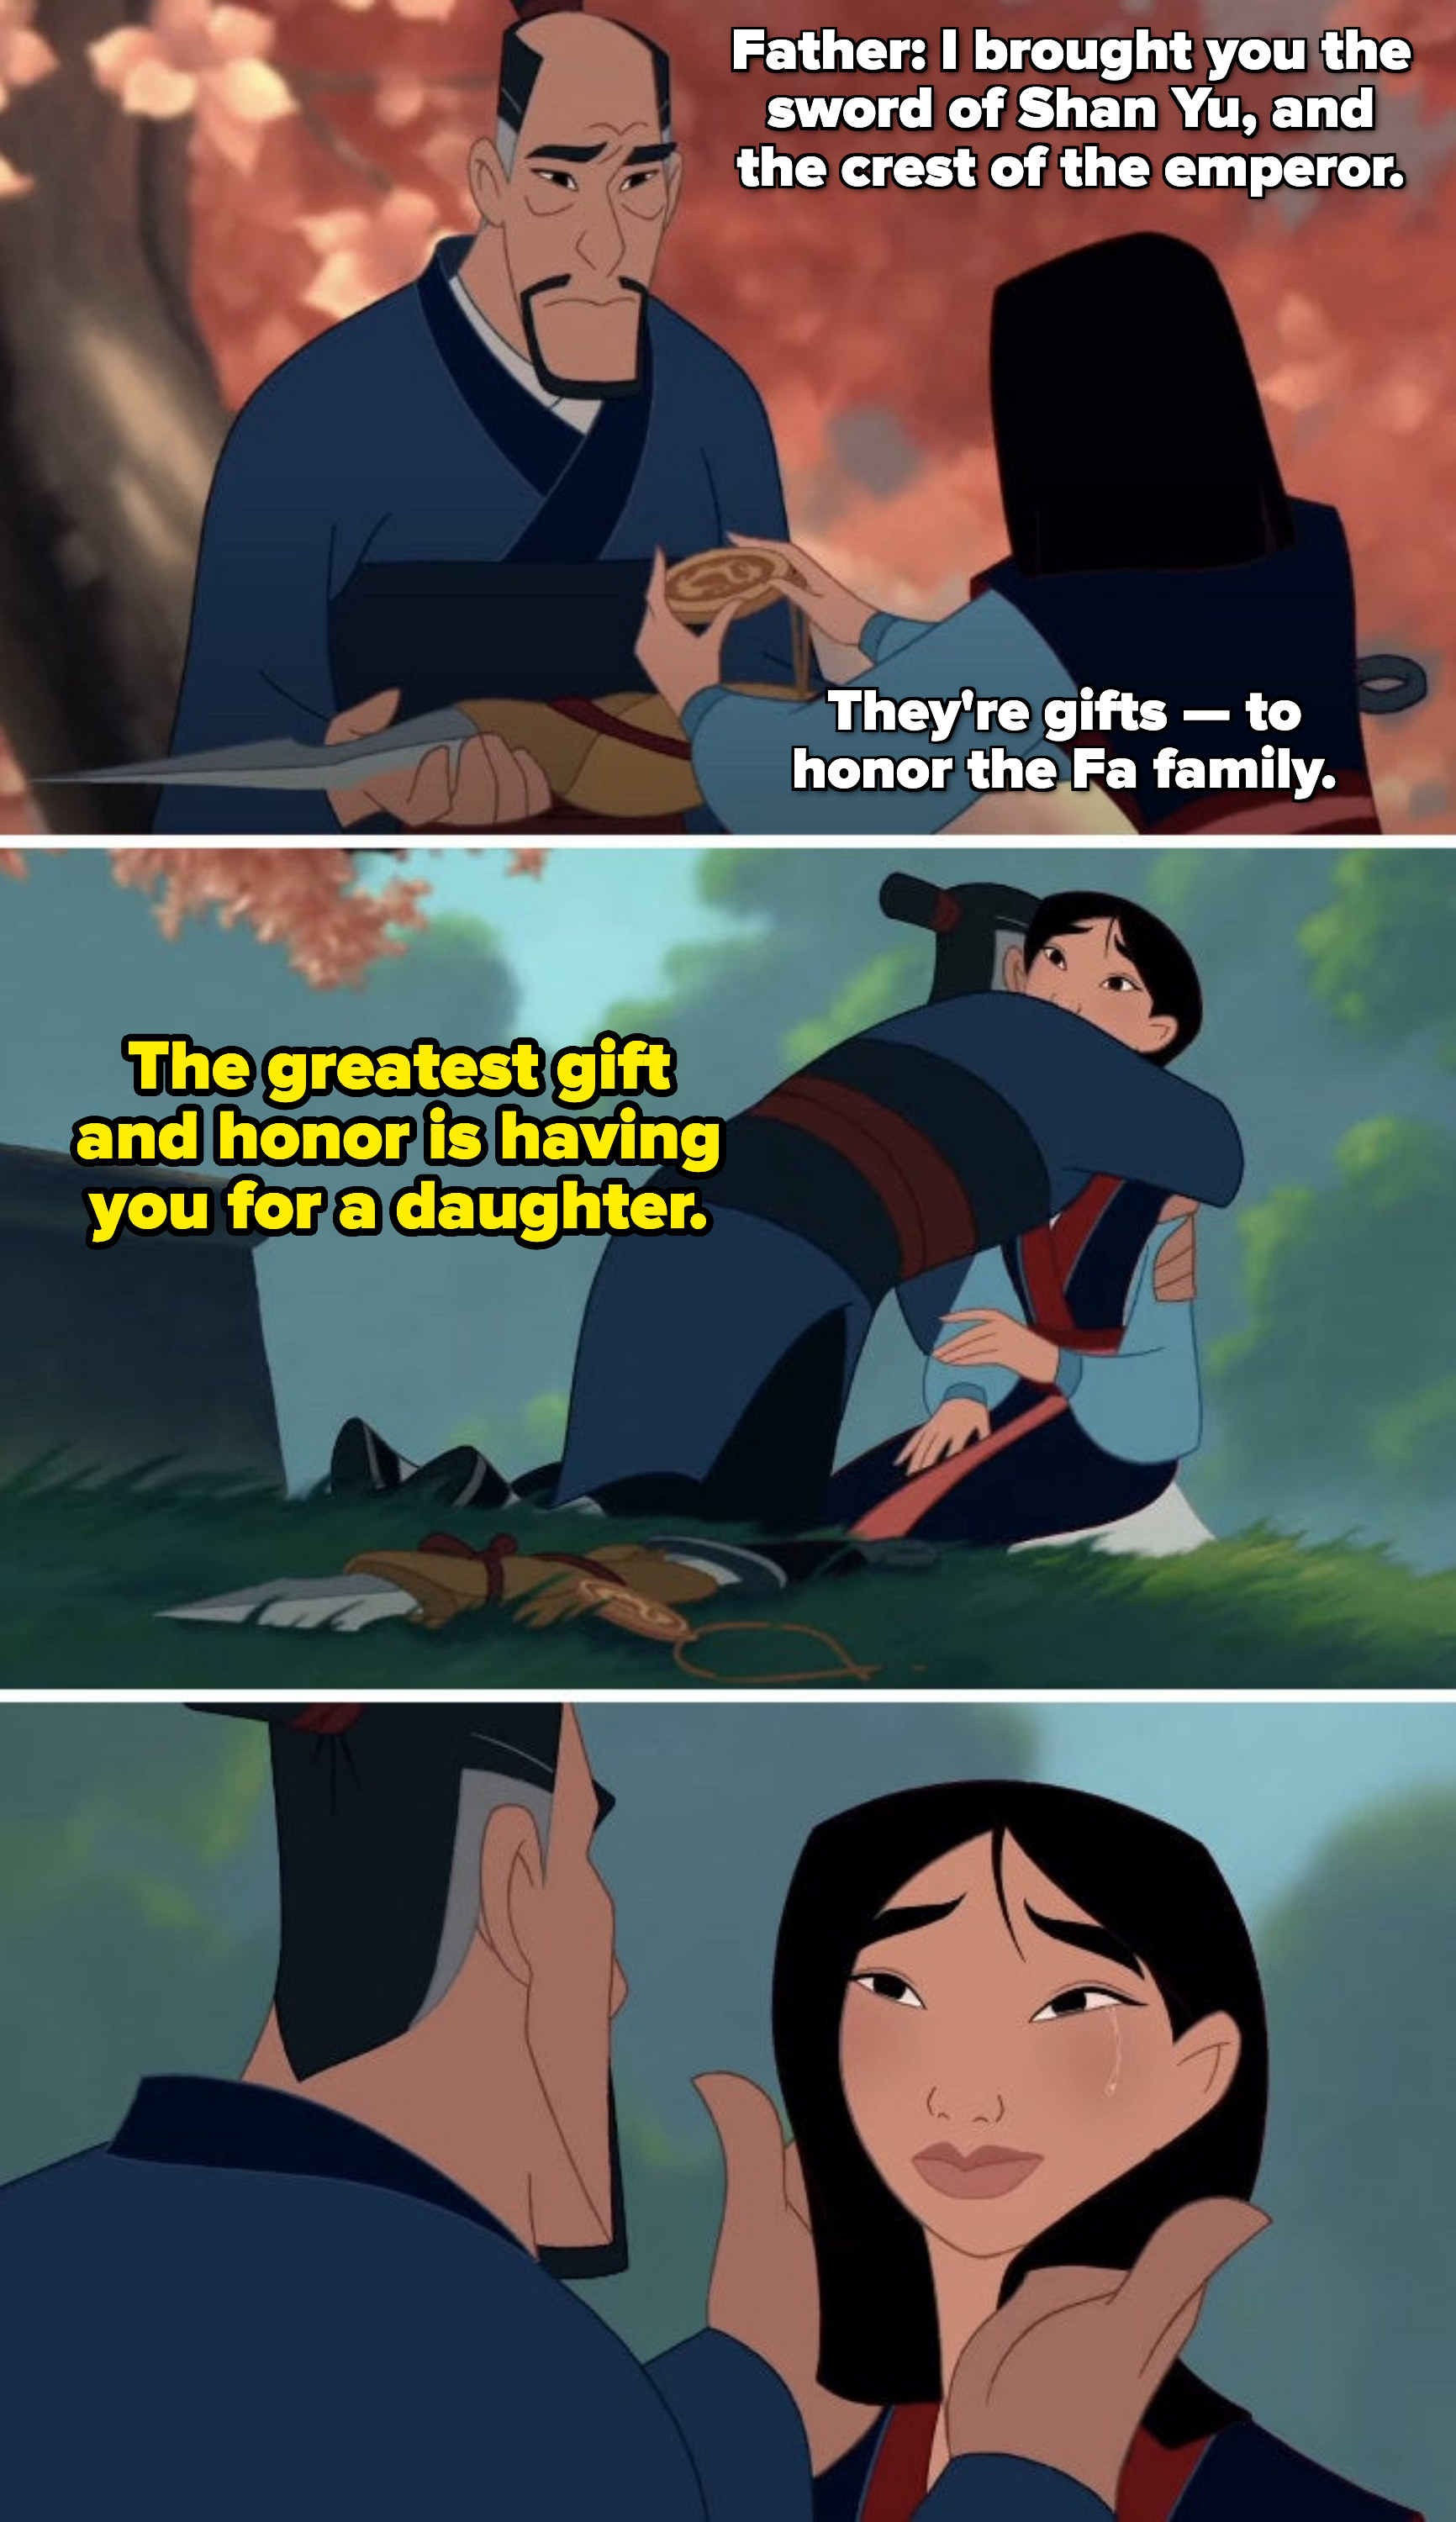 Mulan&#x27;s father telling her: &quot;The greatest gift and honor is having you for a daughter&quot;